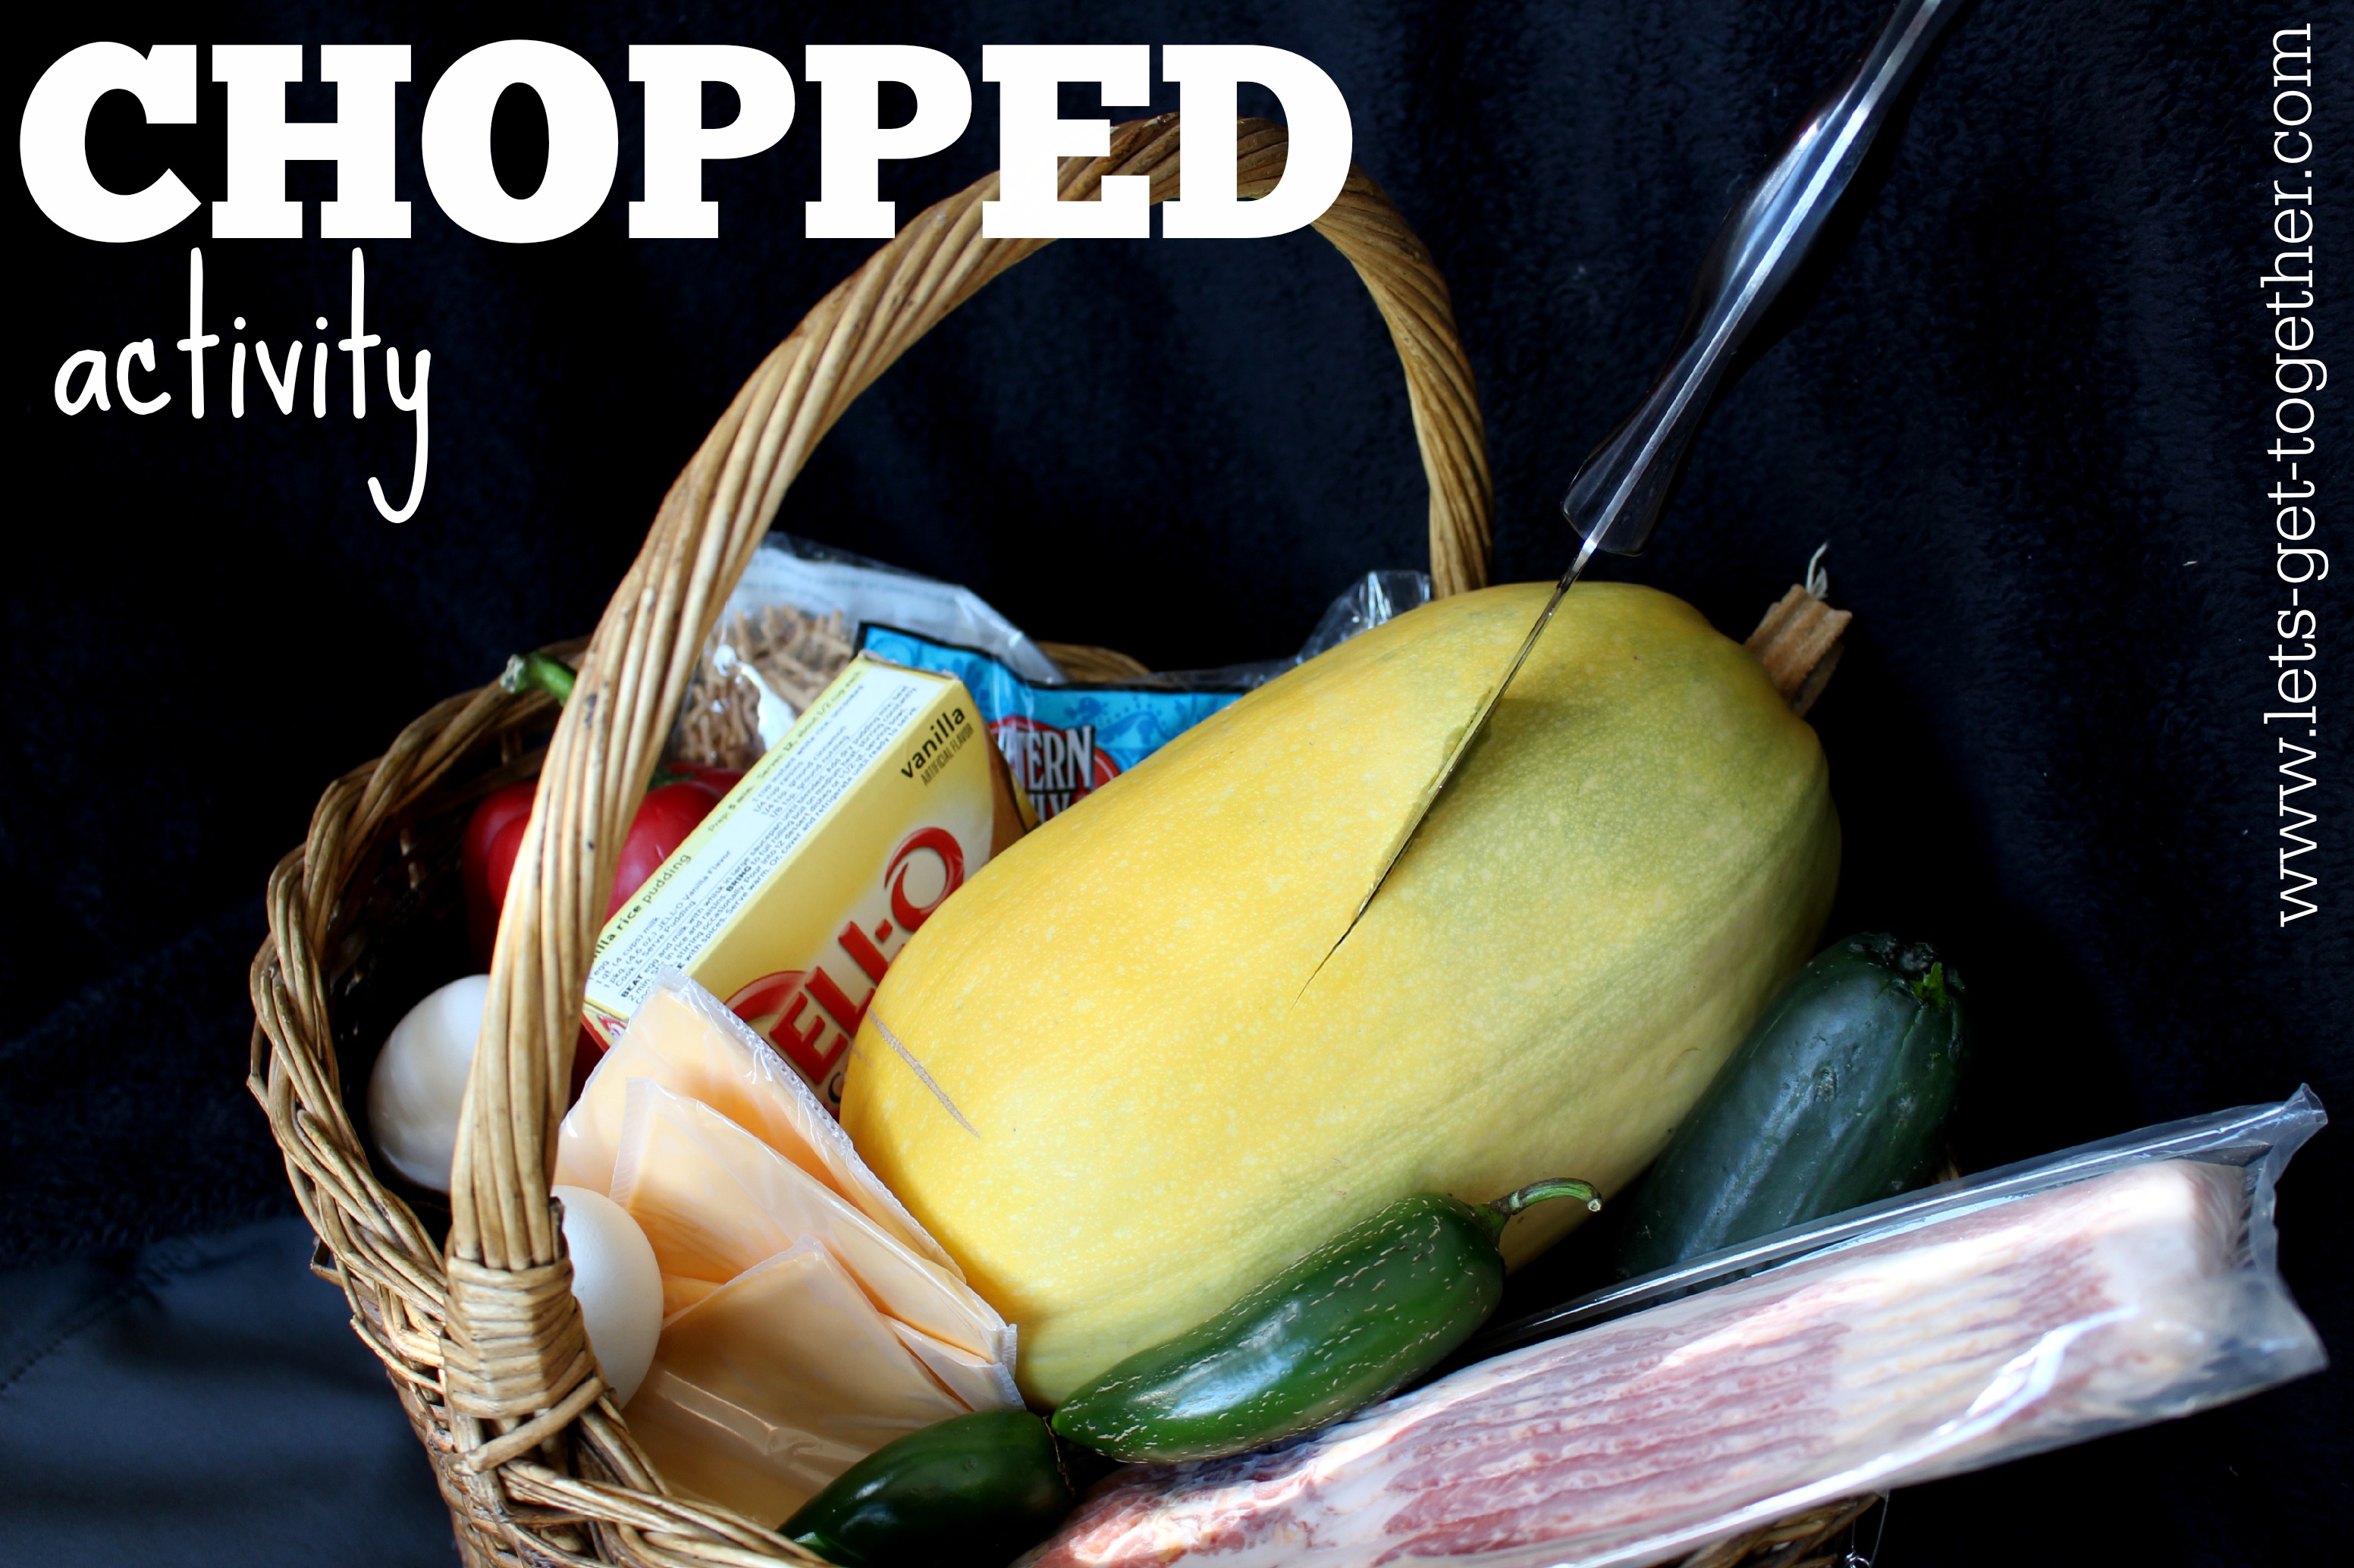 How to Play Chopped at Home including Basket Ideas